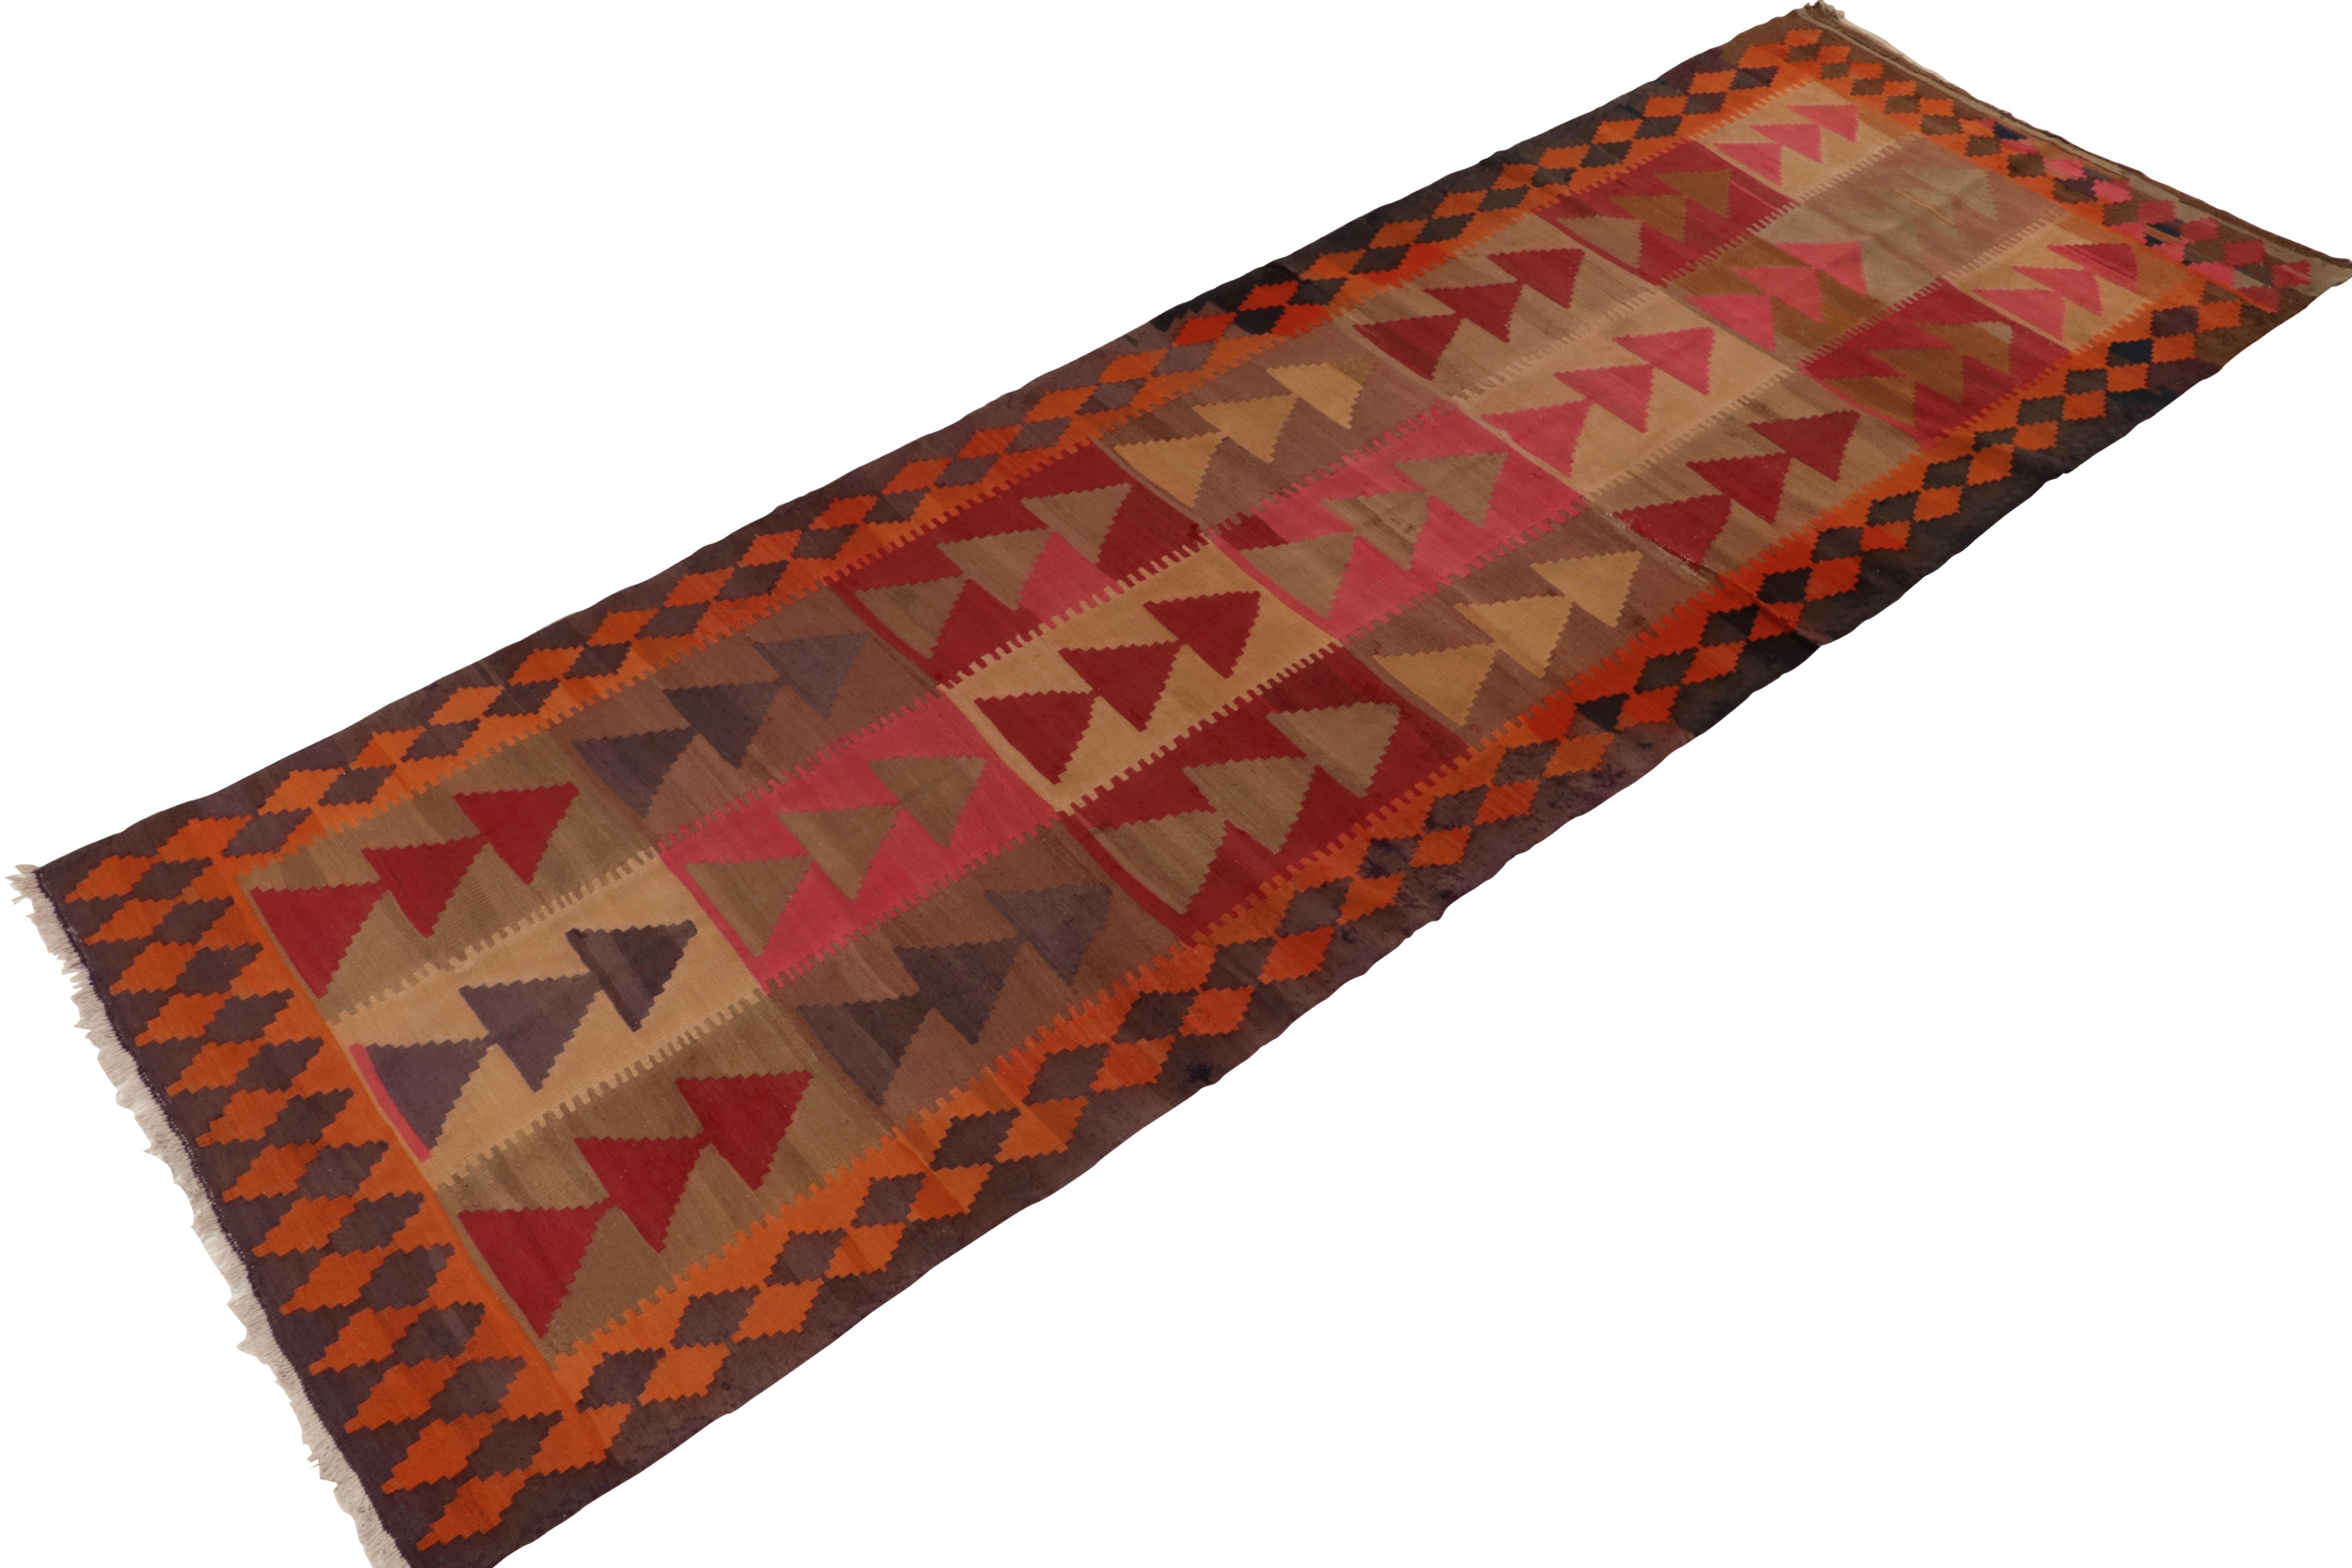 A vintage 4x13 Kilim rug, handwoven in wool originating from Turkey circa 1950-1960. Enjoying a play of the most unusual colors, primarily beige-brown with a unique gray-purple element alongside the red, pink, and orange lending a beautiful